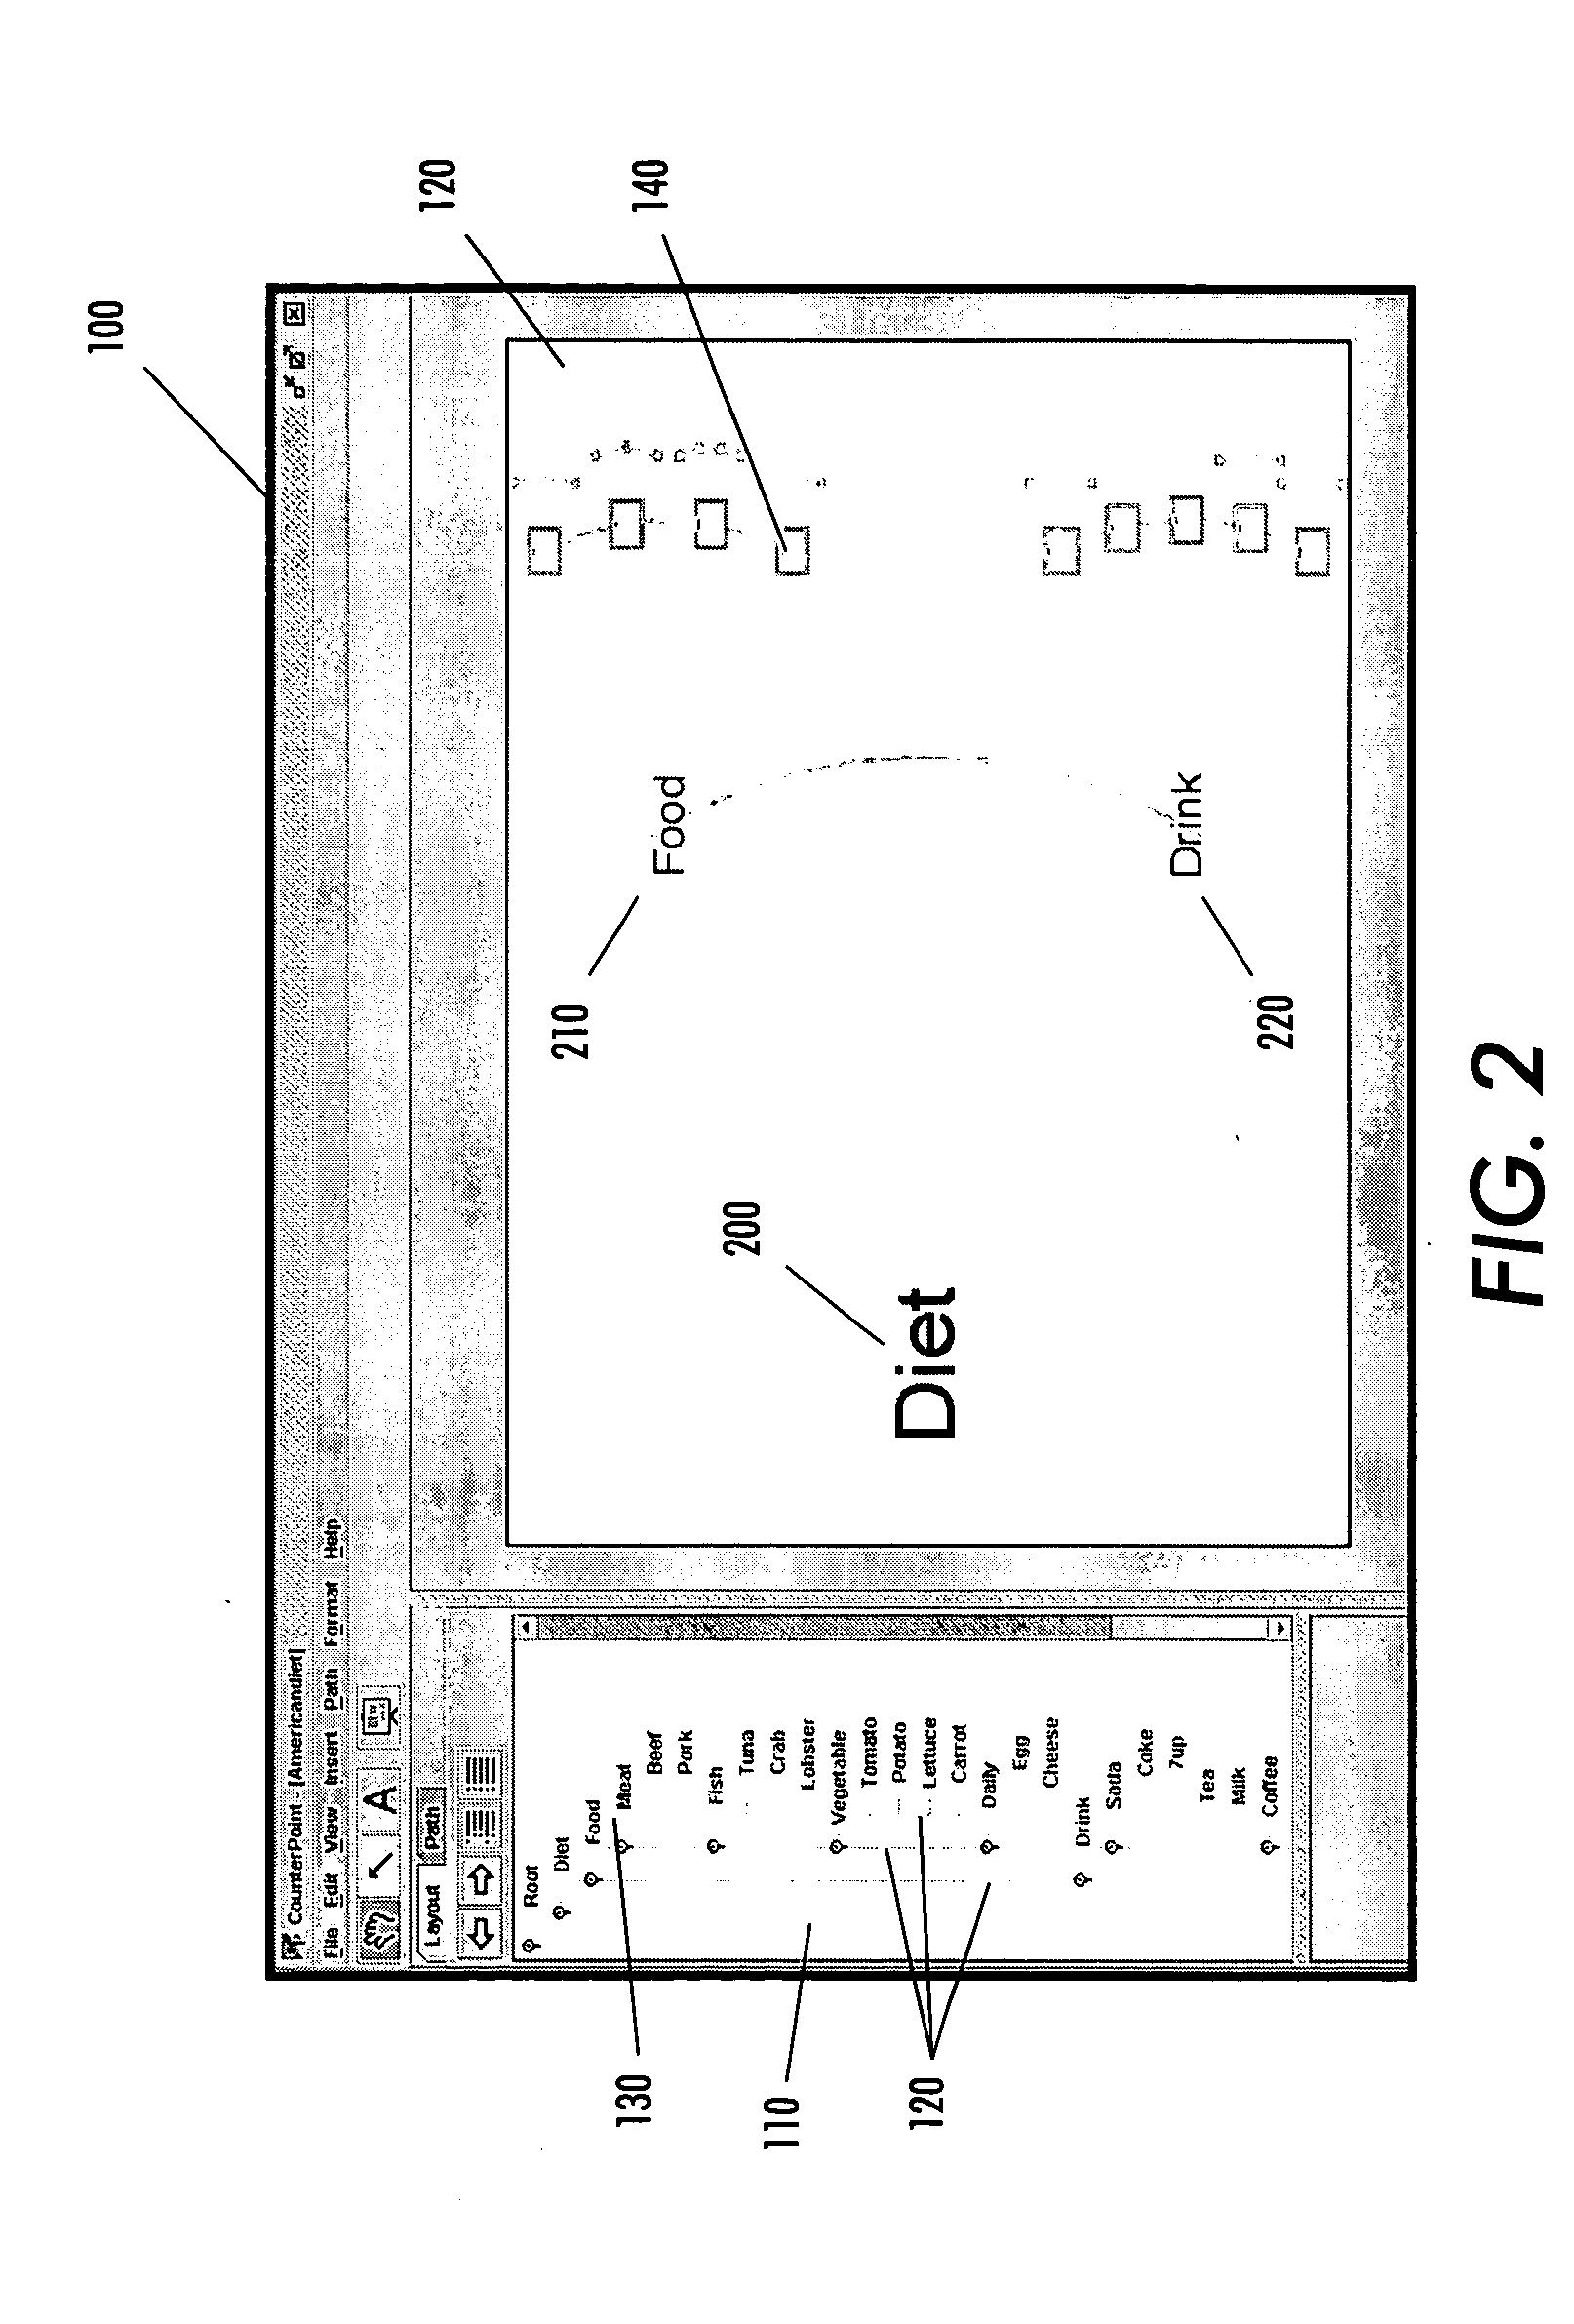 Methods and systems for supporting presentation tools using zoomable user interface